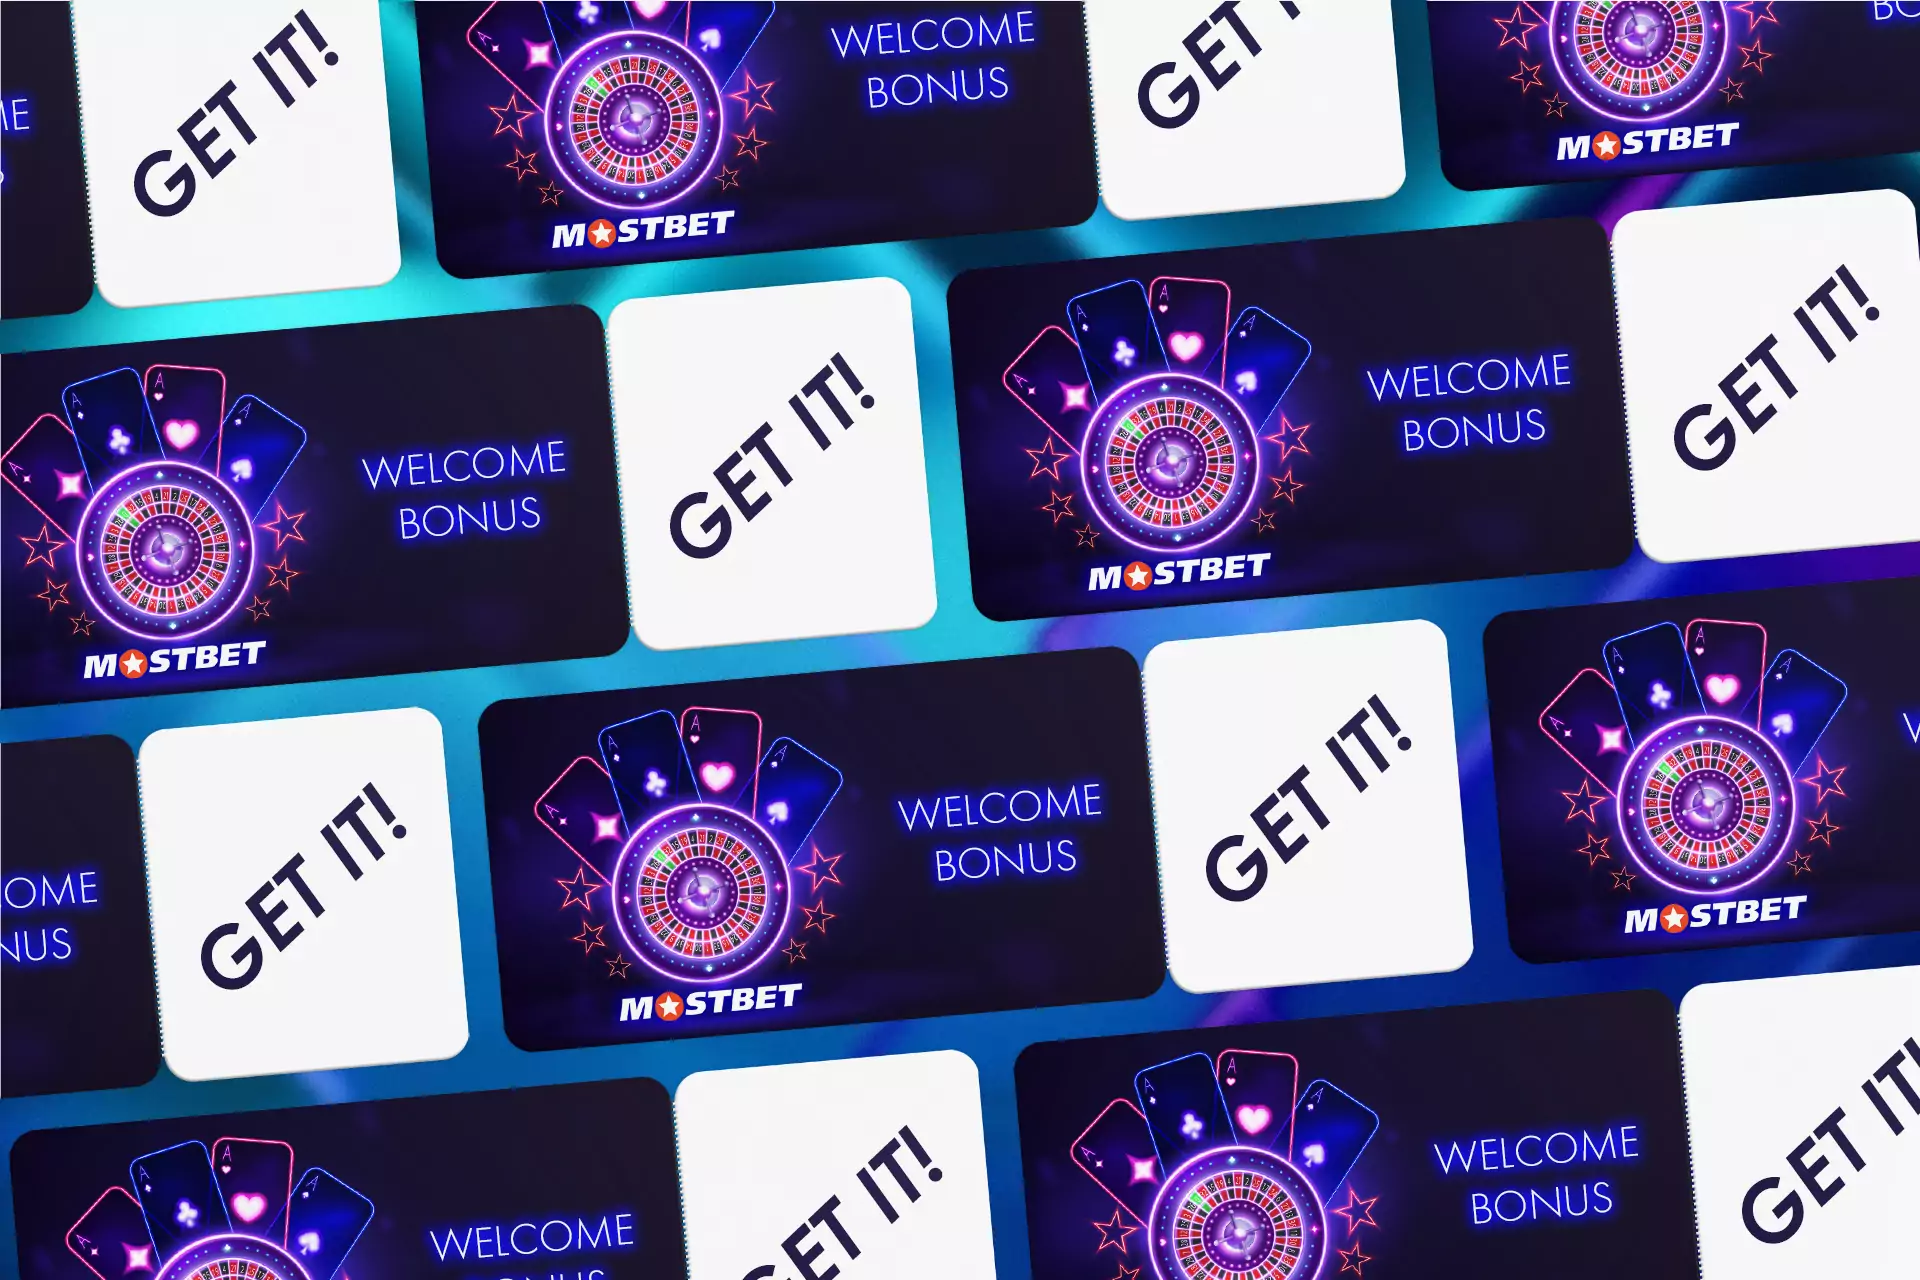 During registration, you can claim the welcome bonus for playing casino on the Mostbet.